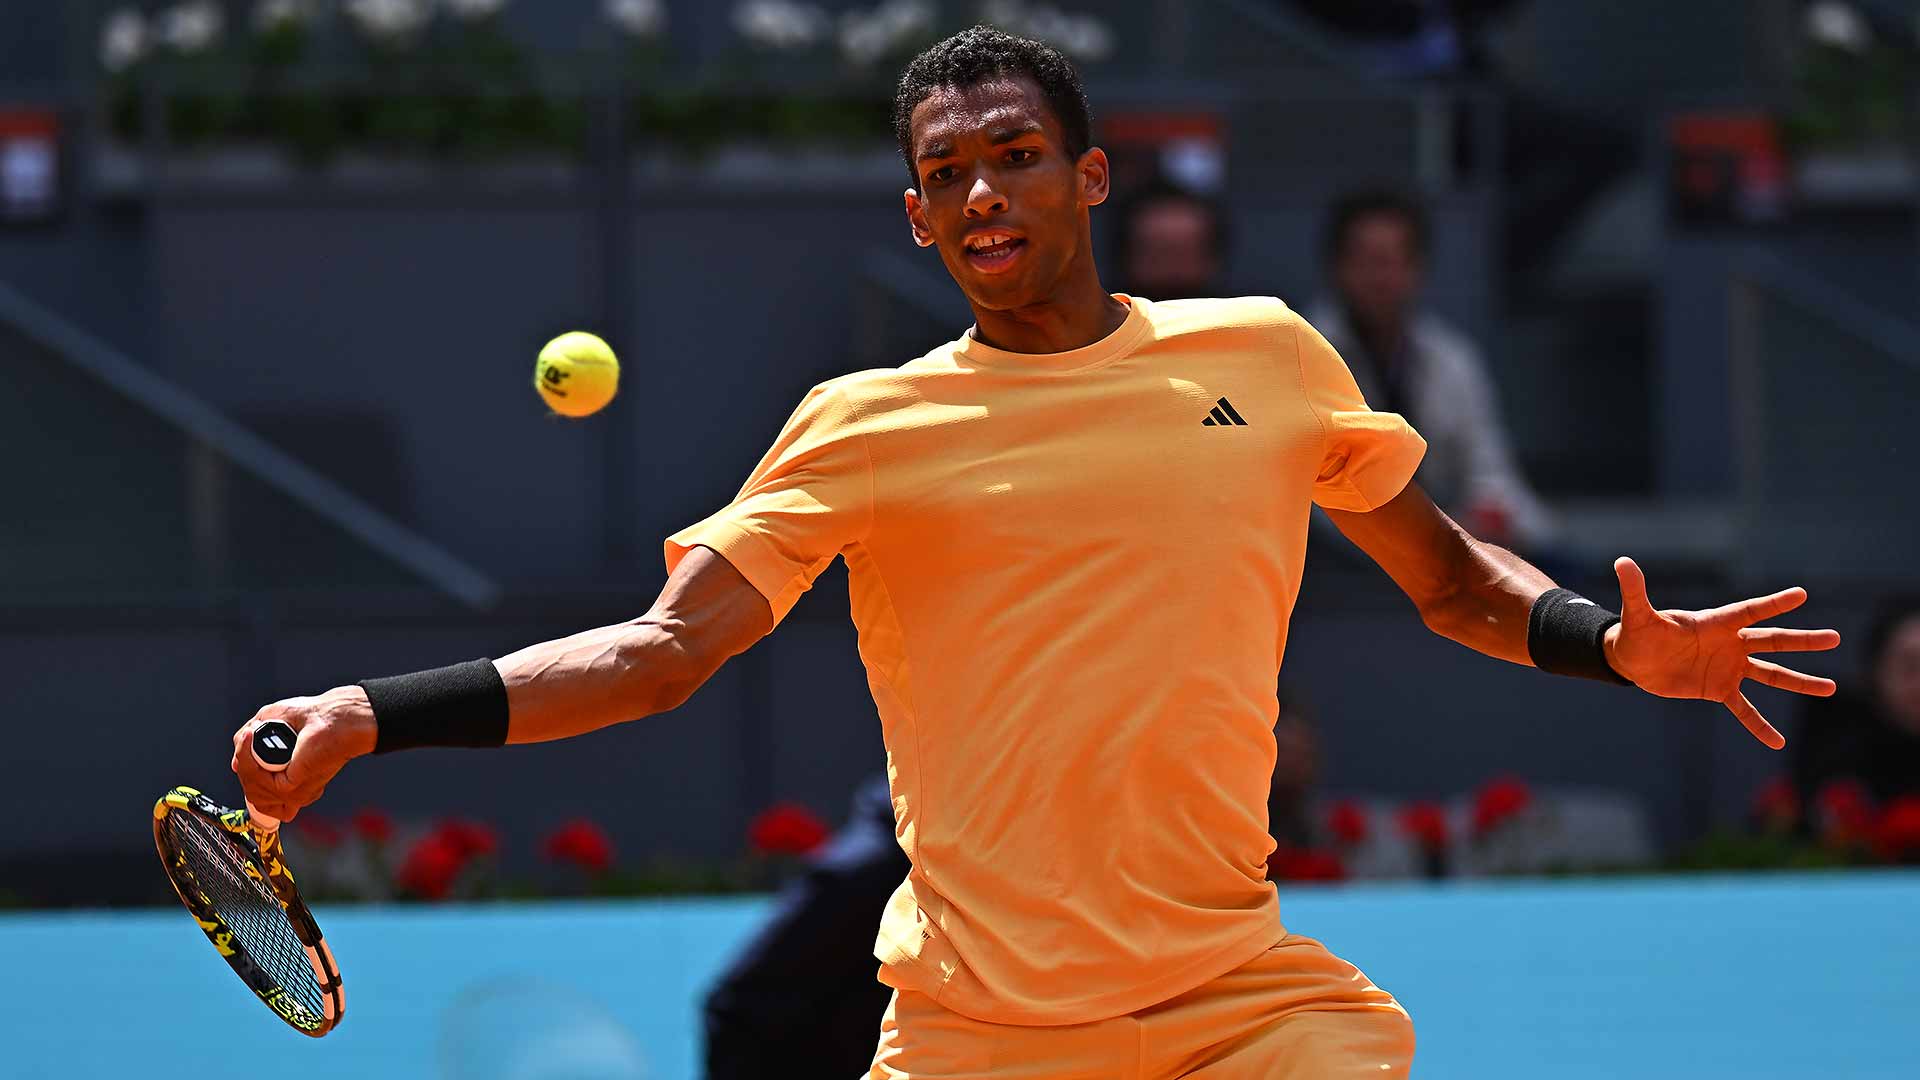 Felix Auger-Aliassime improves to 12-10 on the year by winning his opening match in Madrid.